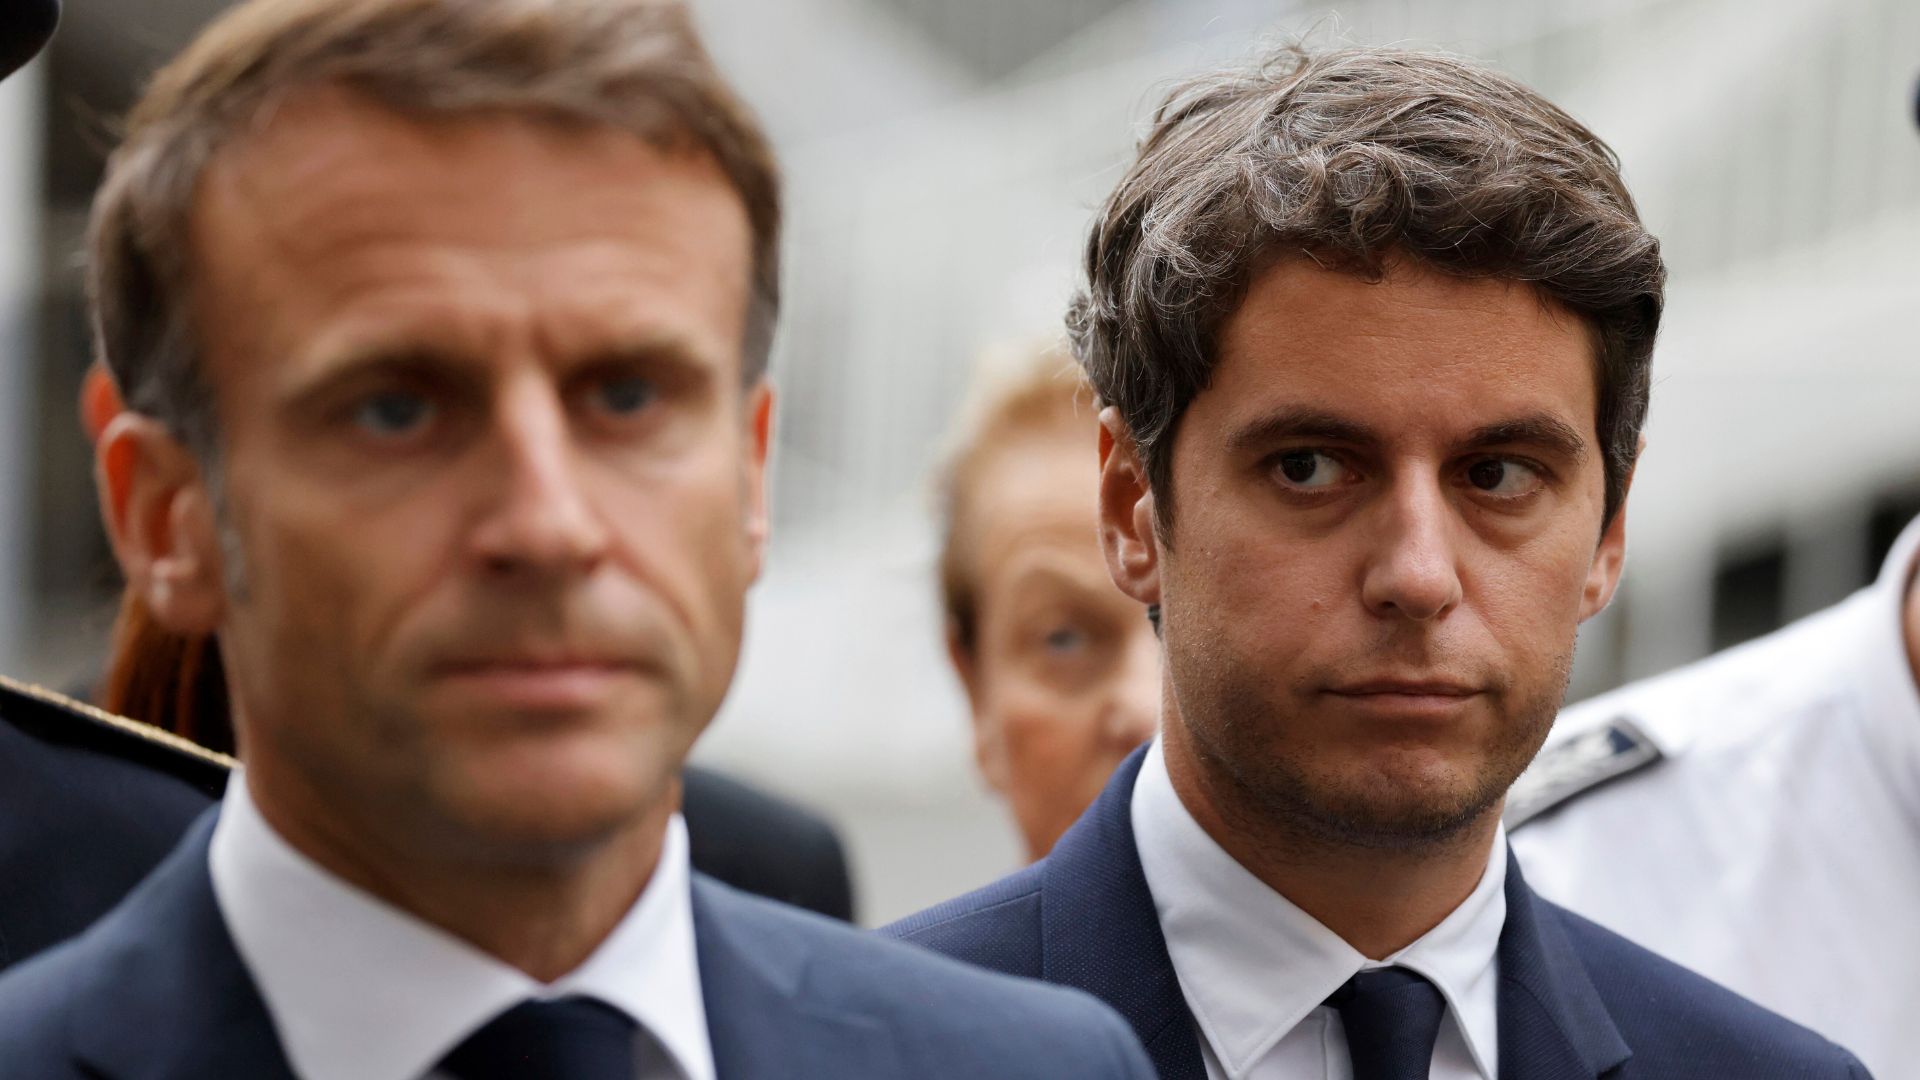 Then French Education and Youth Minister Gabriel Attal watches French President Emmanuel Macron talking to the press at the Gambetta high school in Arras, northeastern France. /Ludovic Marin/AP